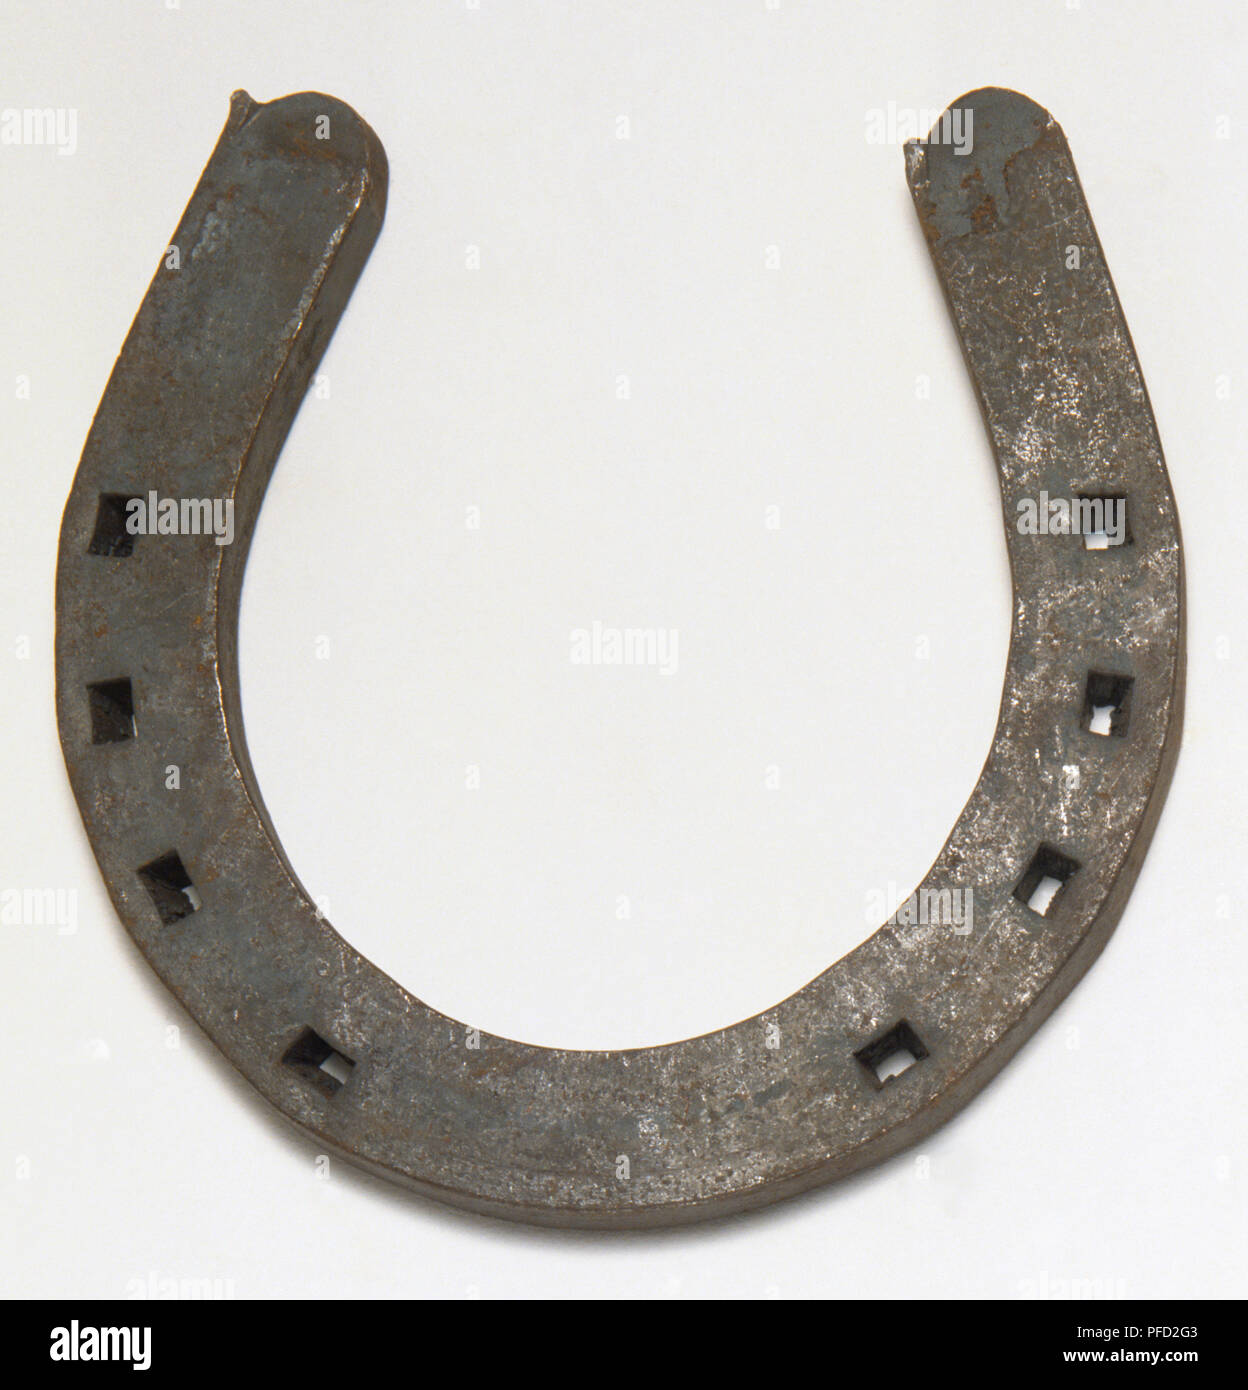 Plain 'Stamped' horseshoe, sturdy shoe for heavy horses, plain heal, nail holes, above view. Stock Photo